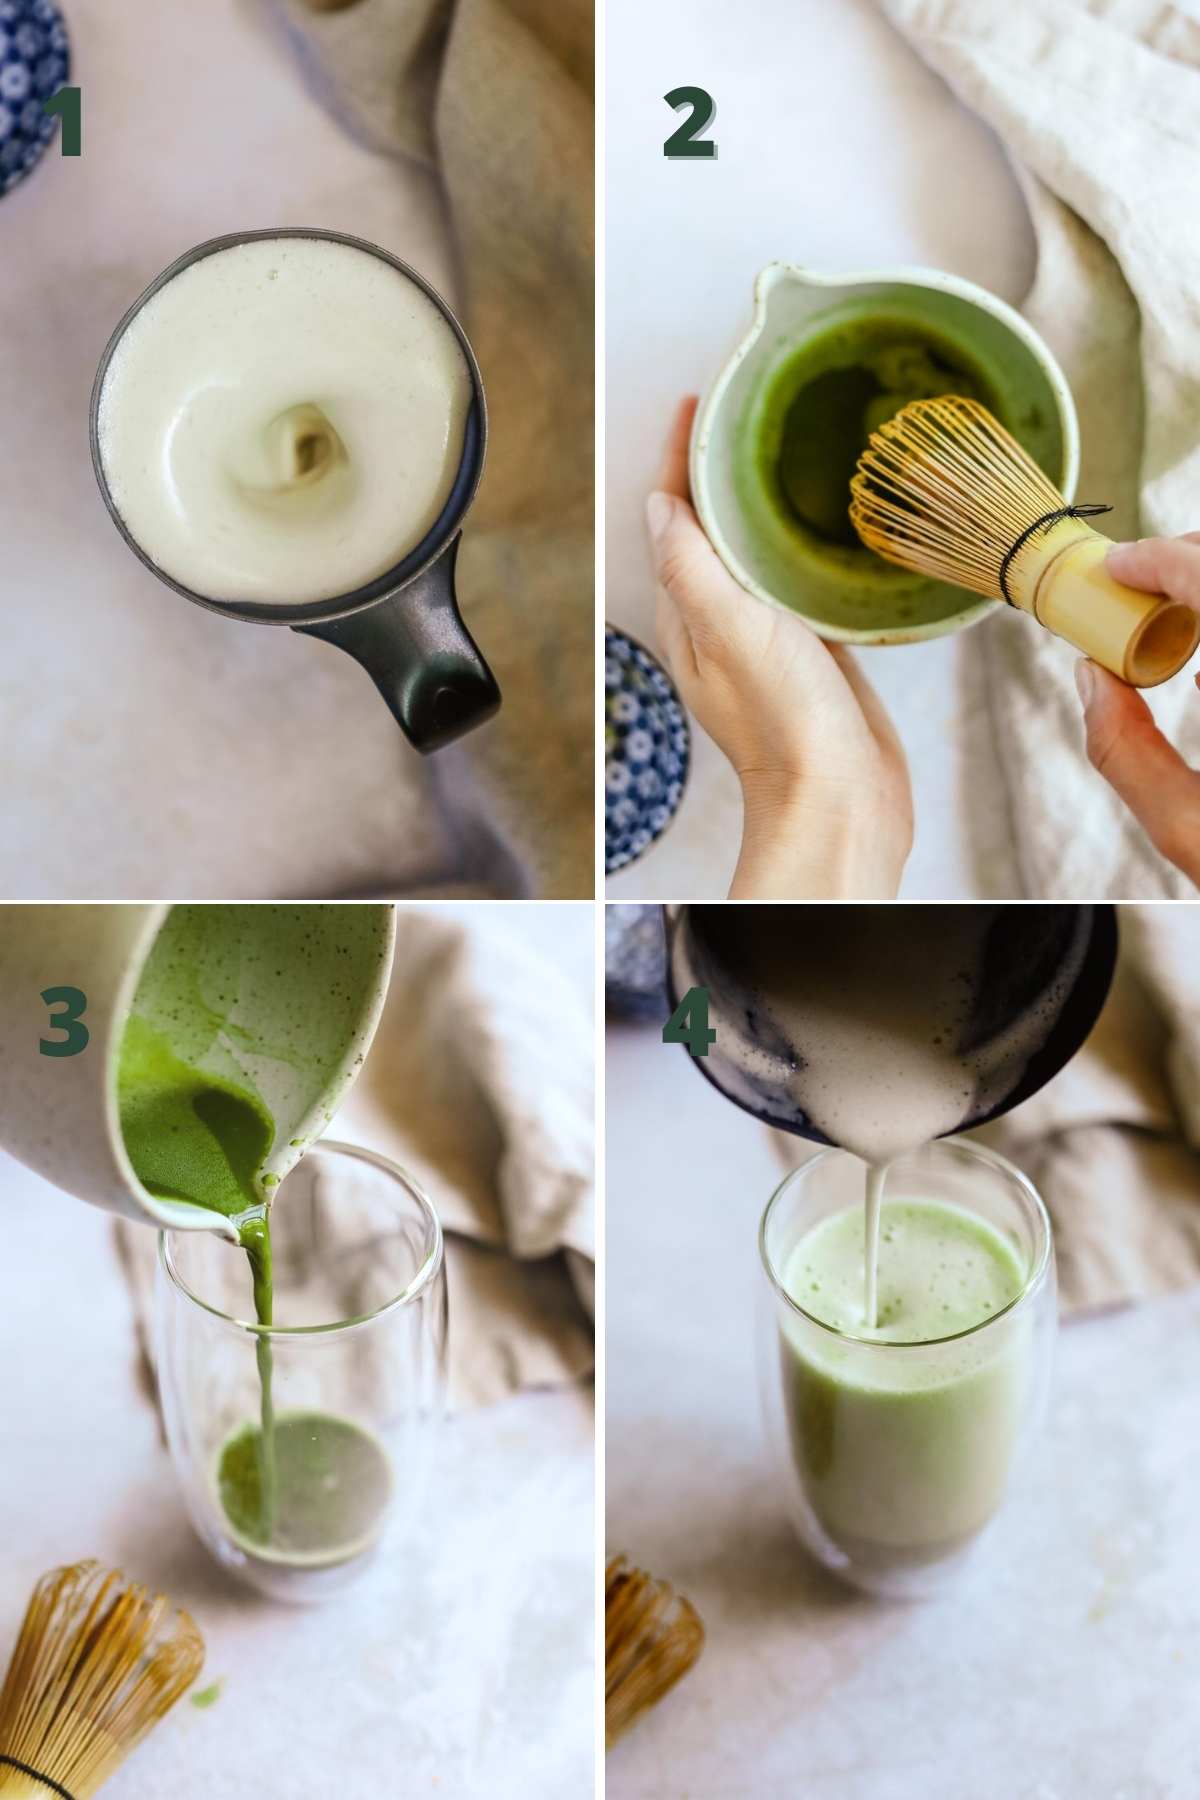 Steps to make a vanilla matcha latte iced or hot, including whisking the matcha with water, sweetening the milk, pouring the matcha into the glass, and adding milk.